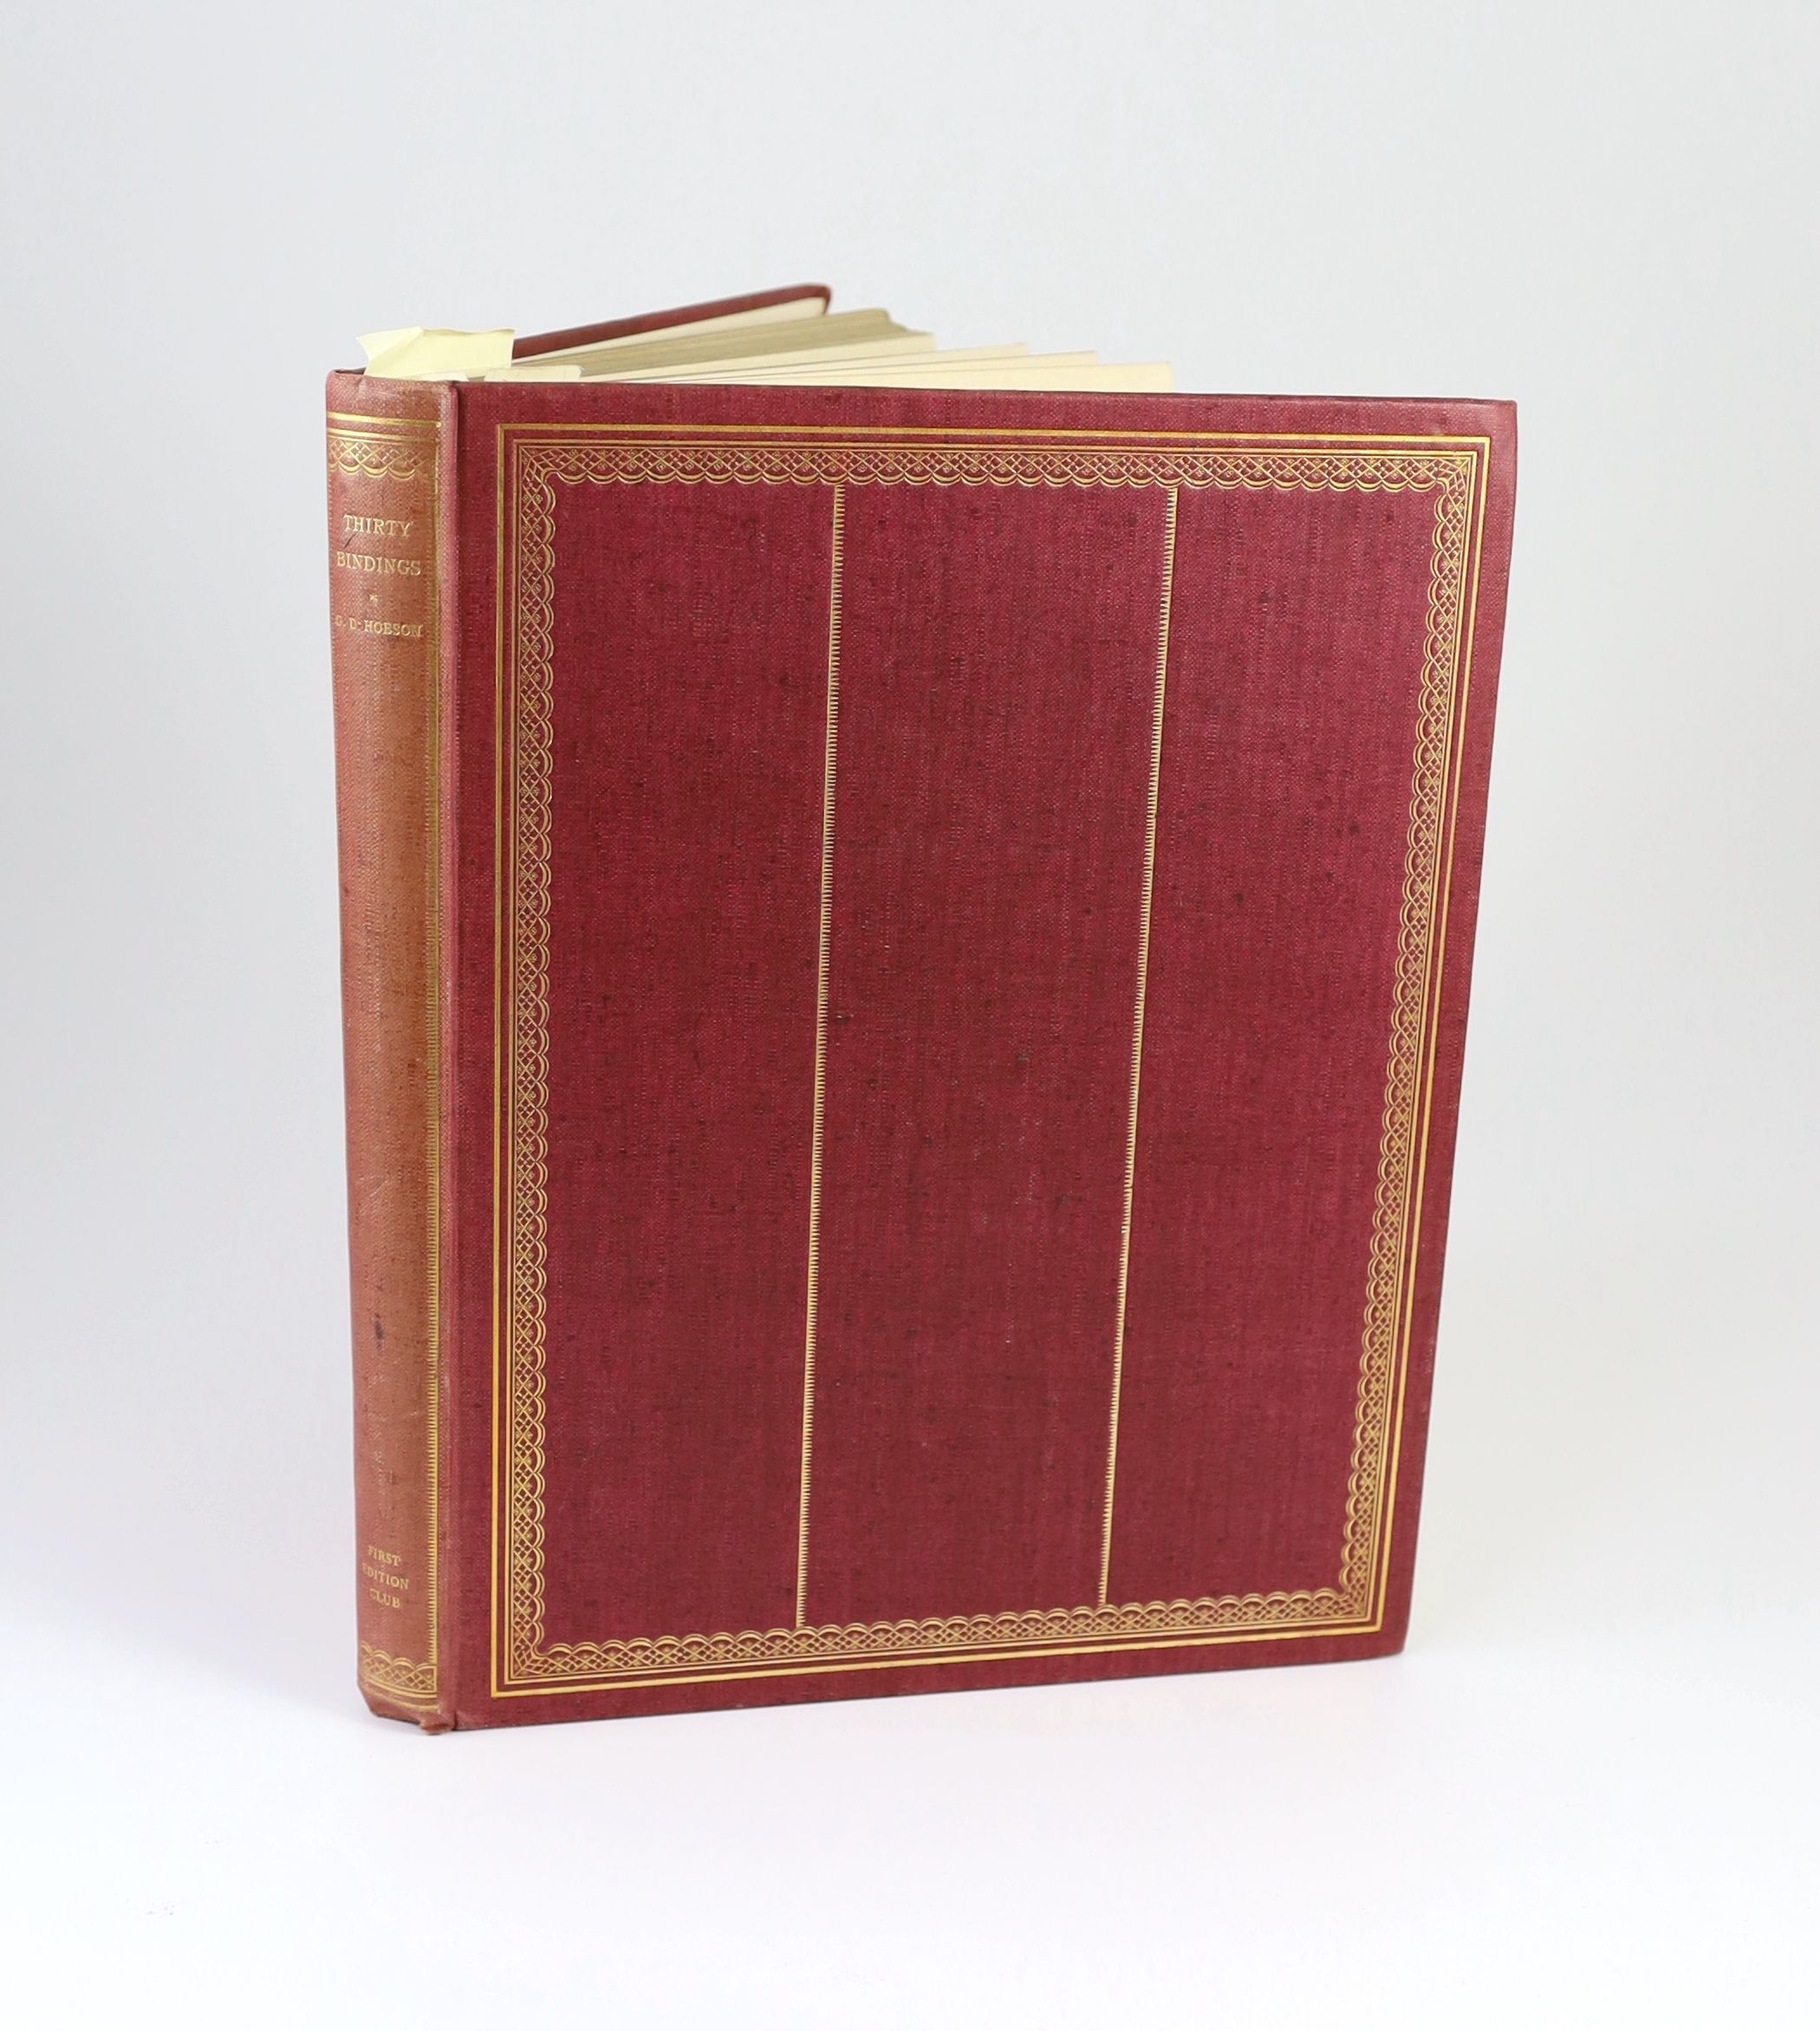 Hobson, Geoffrey D. - Thirty Bindings, one of 600, illustrated with 30 plates, 4to, original cloth, The First Editions Club, London, 1926